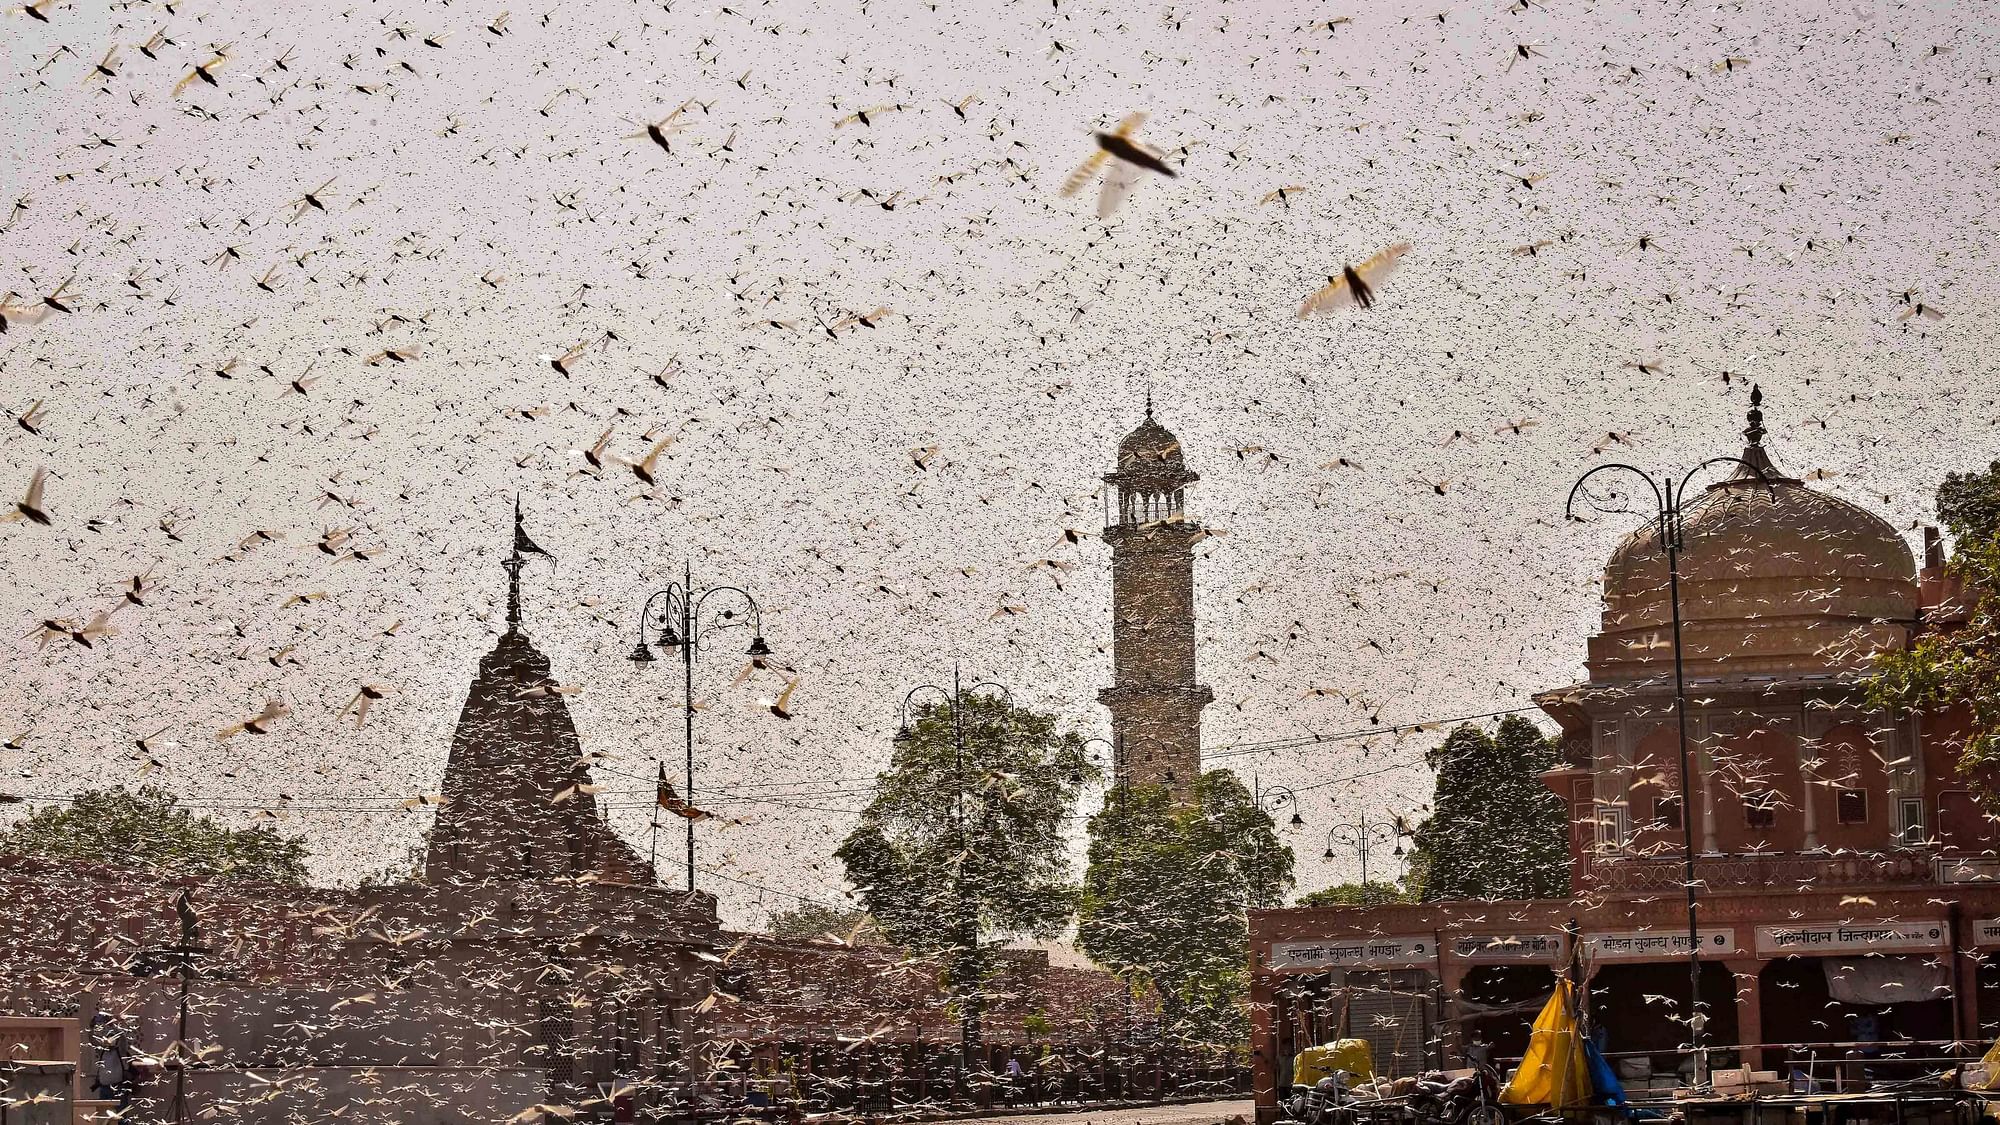 Swarms of locust in the walled city of Jaipur, Rajasthan. More than half of Rajasthan’s 33 districts are affected by invasion by these crop-munching insects.